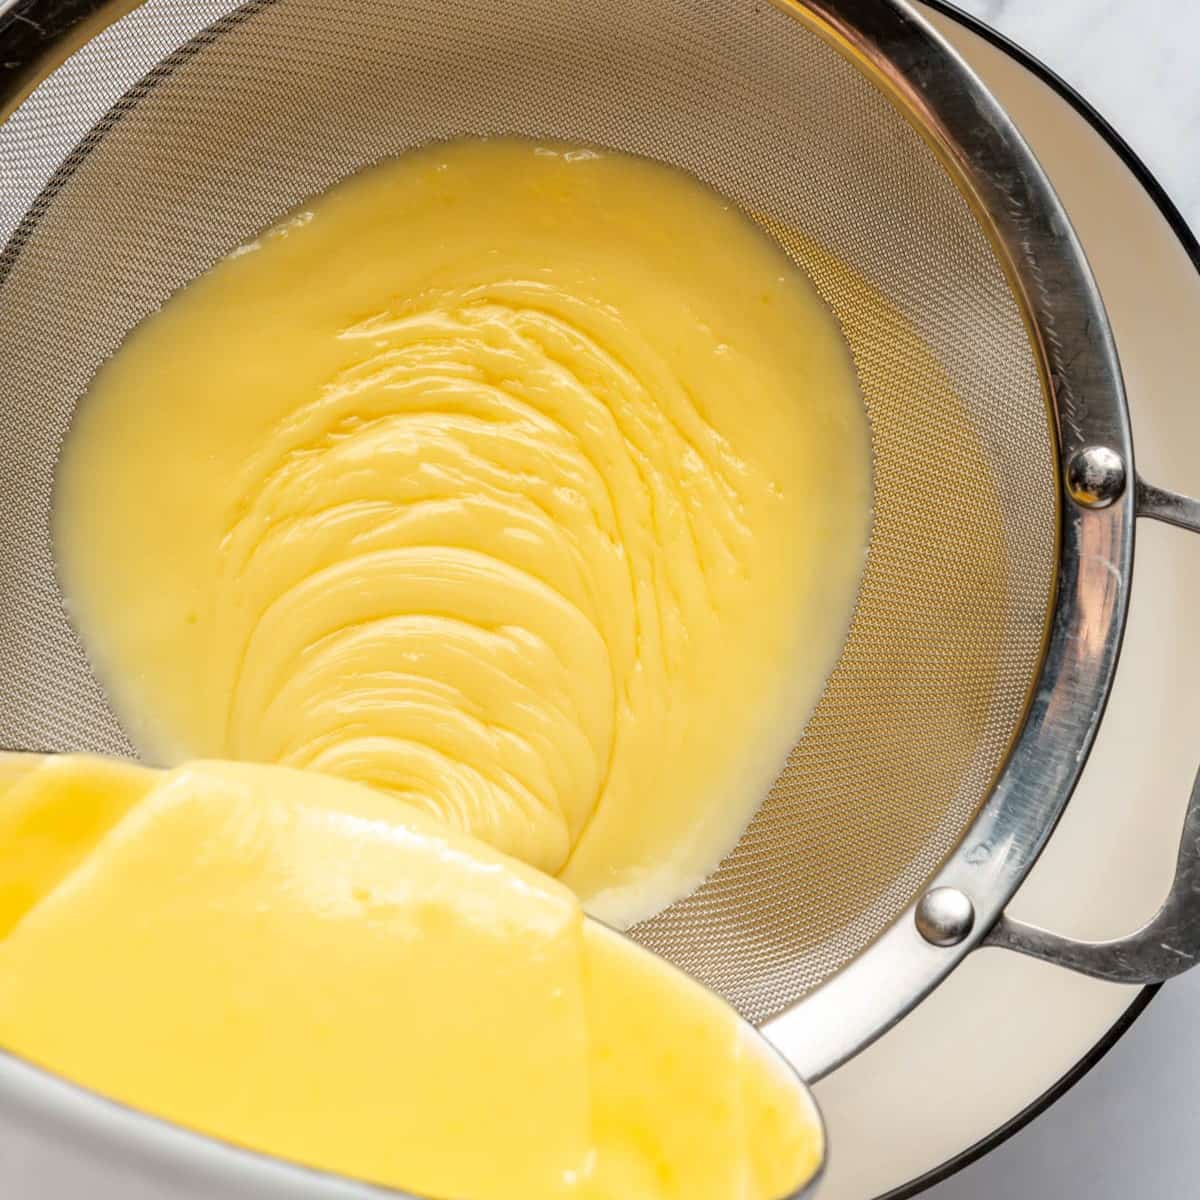 Pouring cooked pudding through a fine mesh sieve.